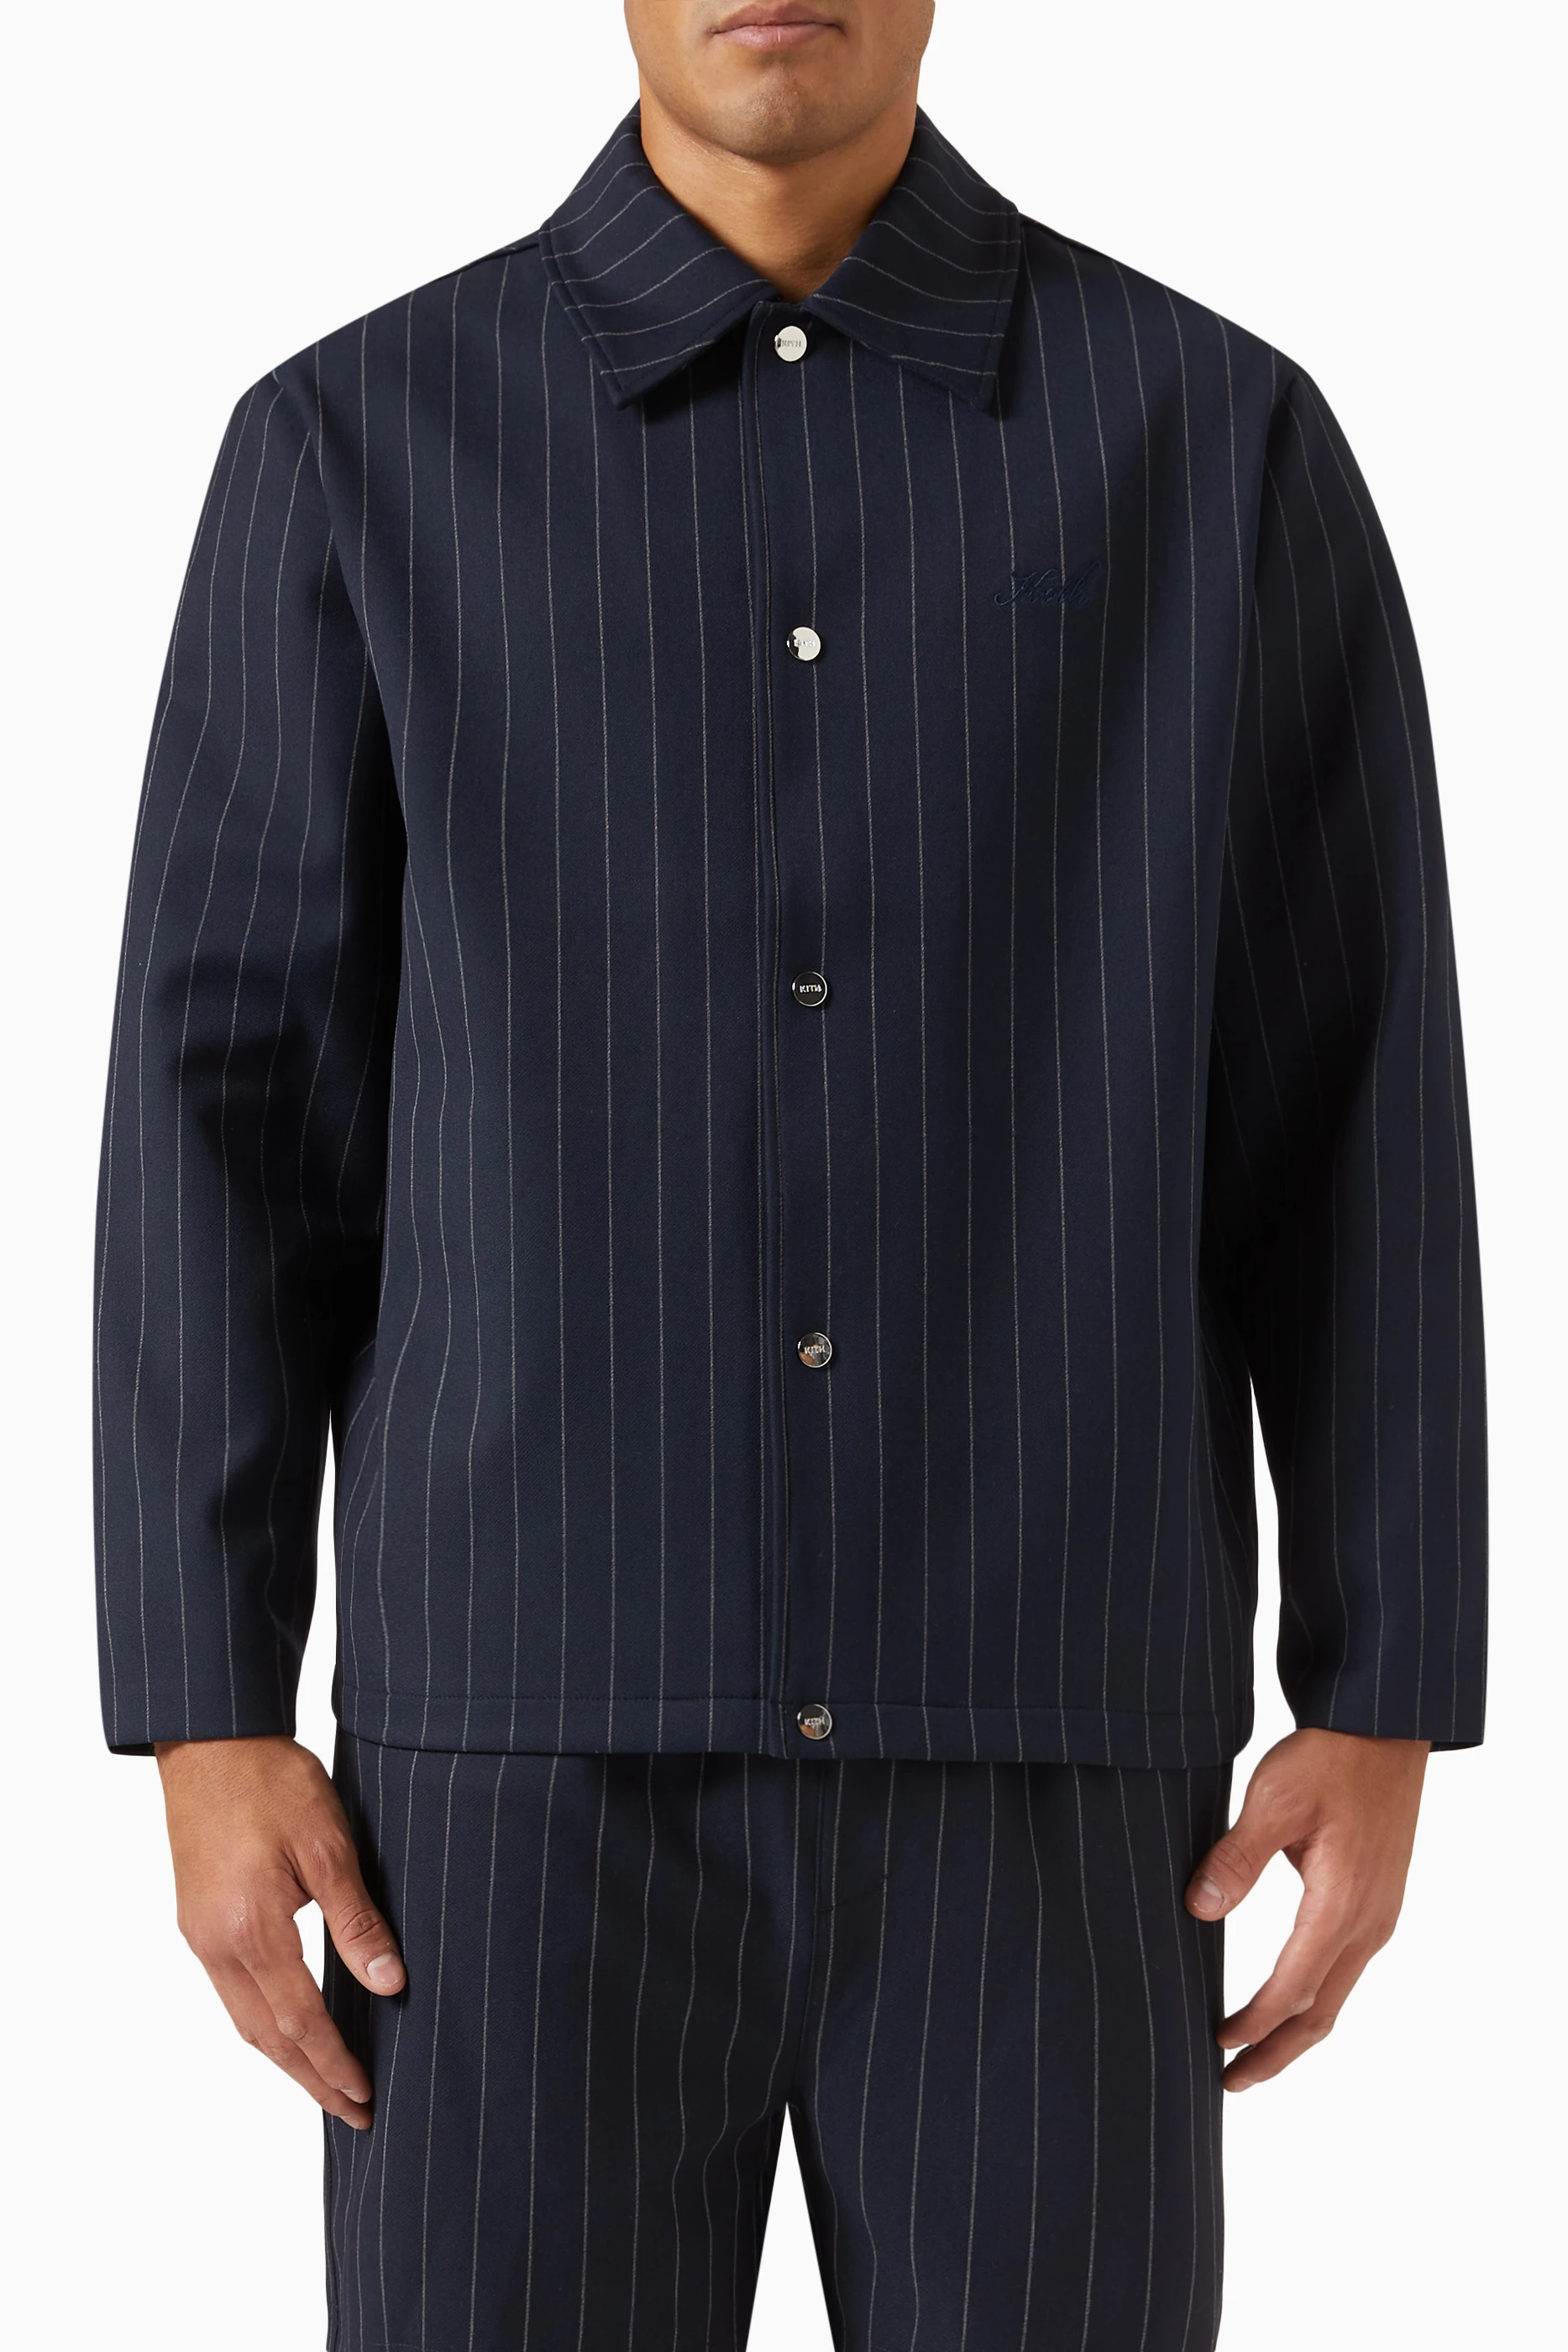 Buy Kith Blue Pinstripe Coaches Jacket in Double Knit for